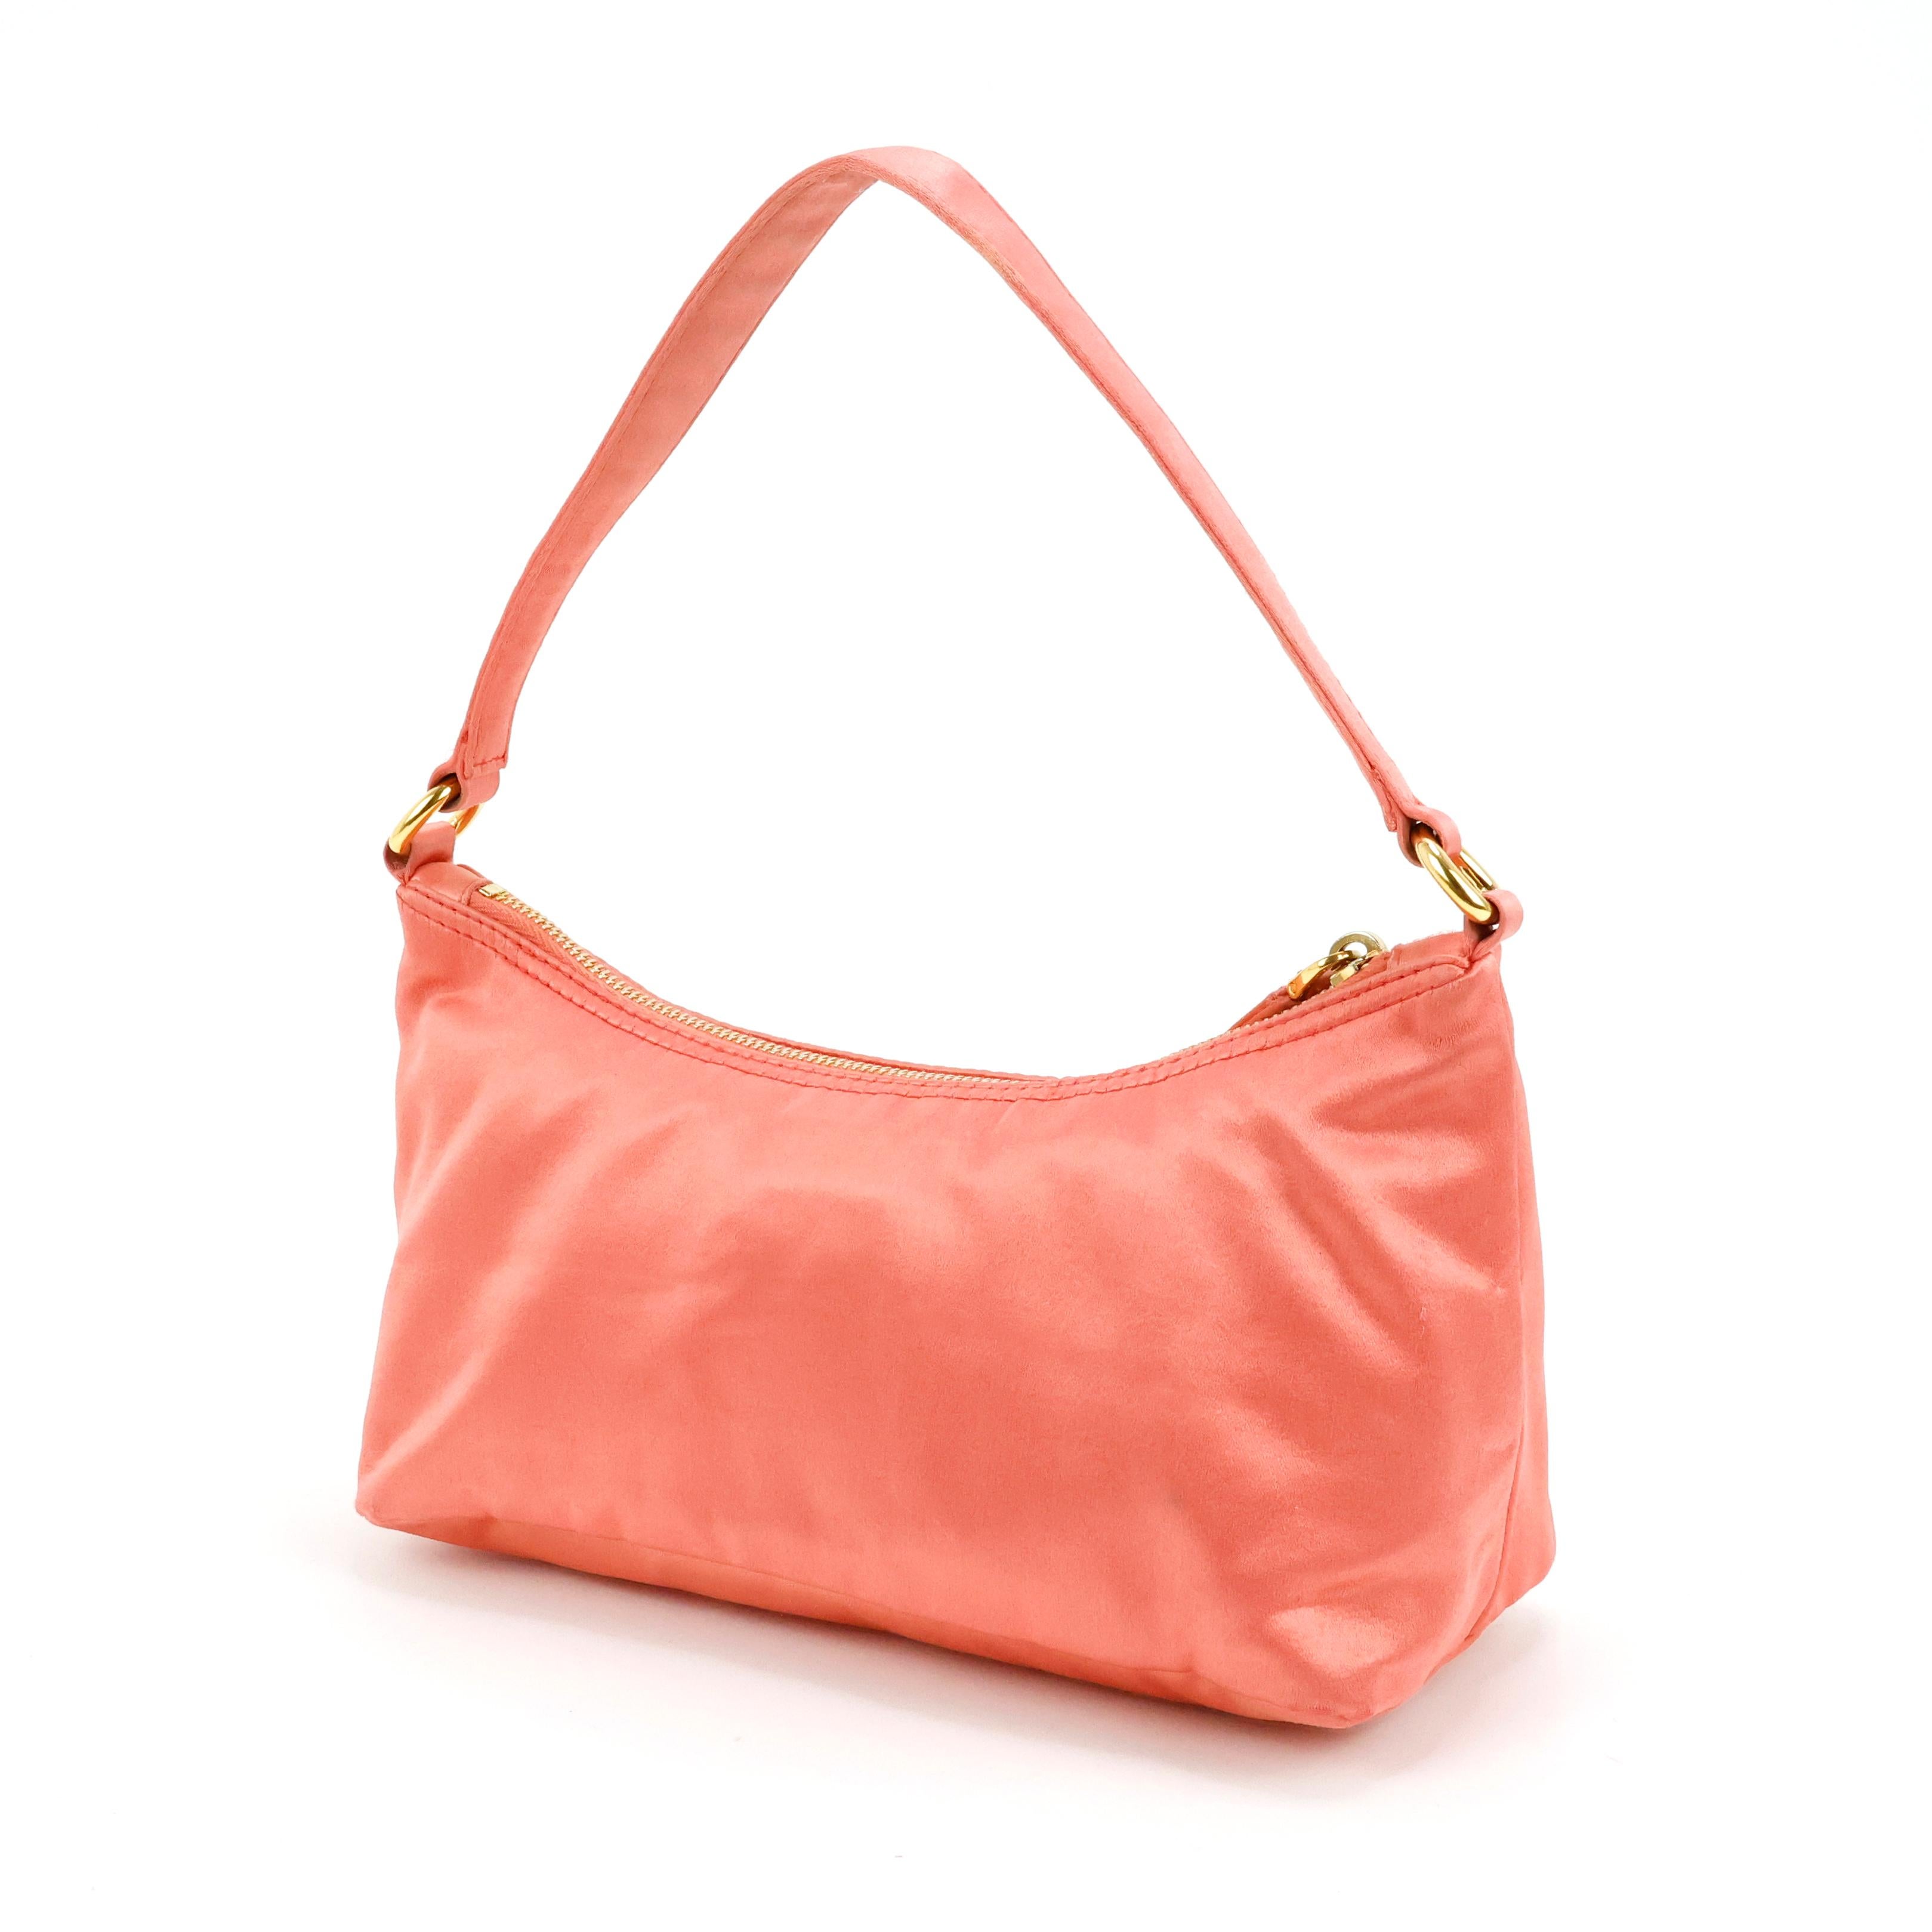 Prada bag in silk color coral pink, gold hardware.

Condition:
Good/really good, to note: slight spots and pulled threads on silk.

Packing/accessories:
Dustbag.

Measurements:
24cm x 10cm x 10cm